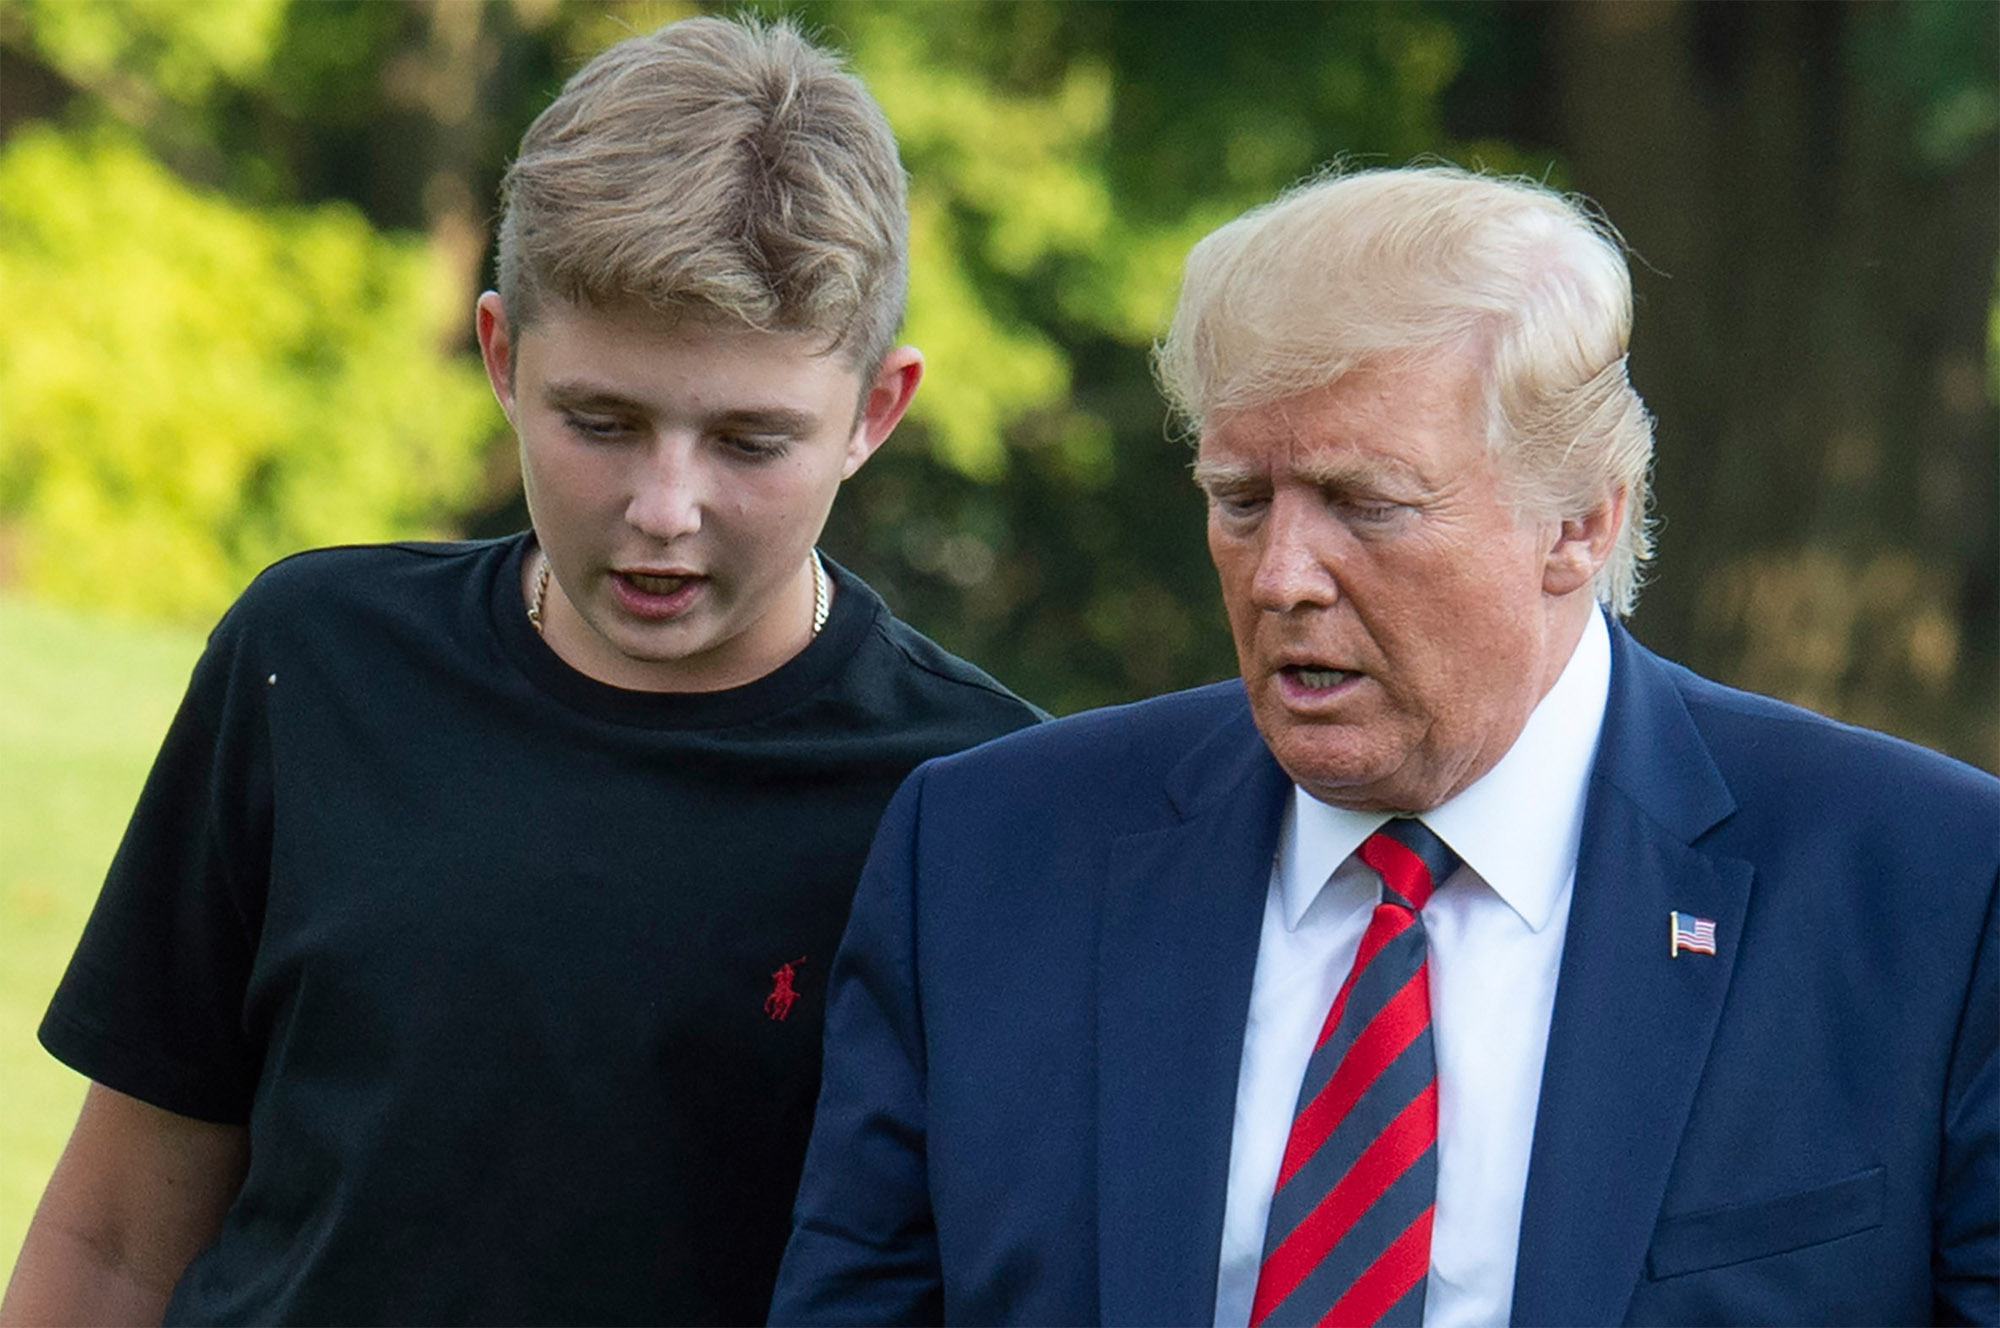 Barron Trump's Private School to Stay Closed for Now Bloomberg